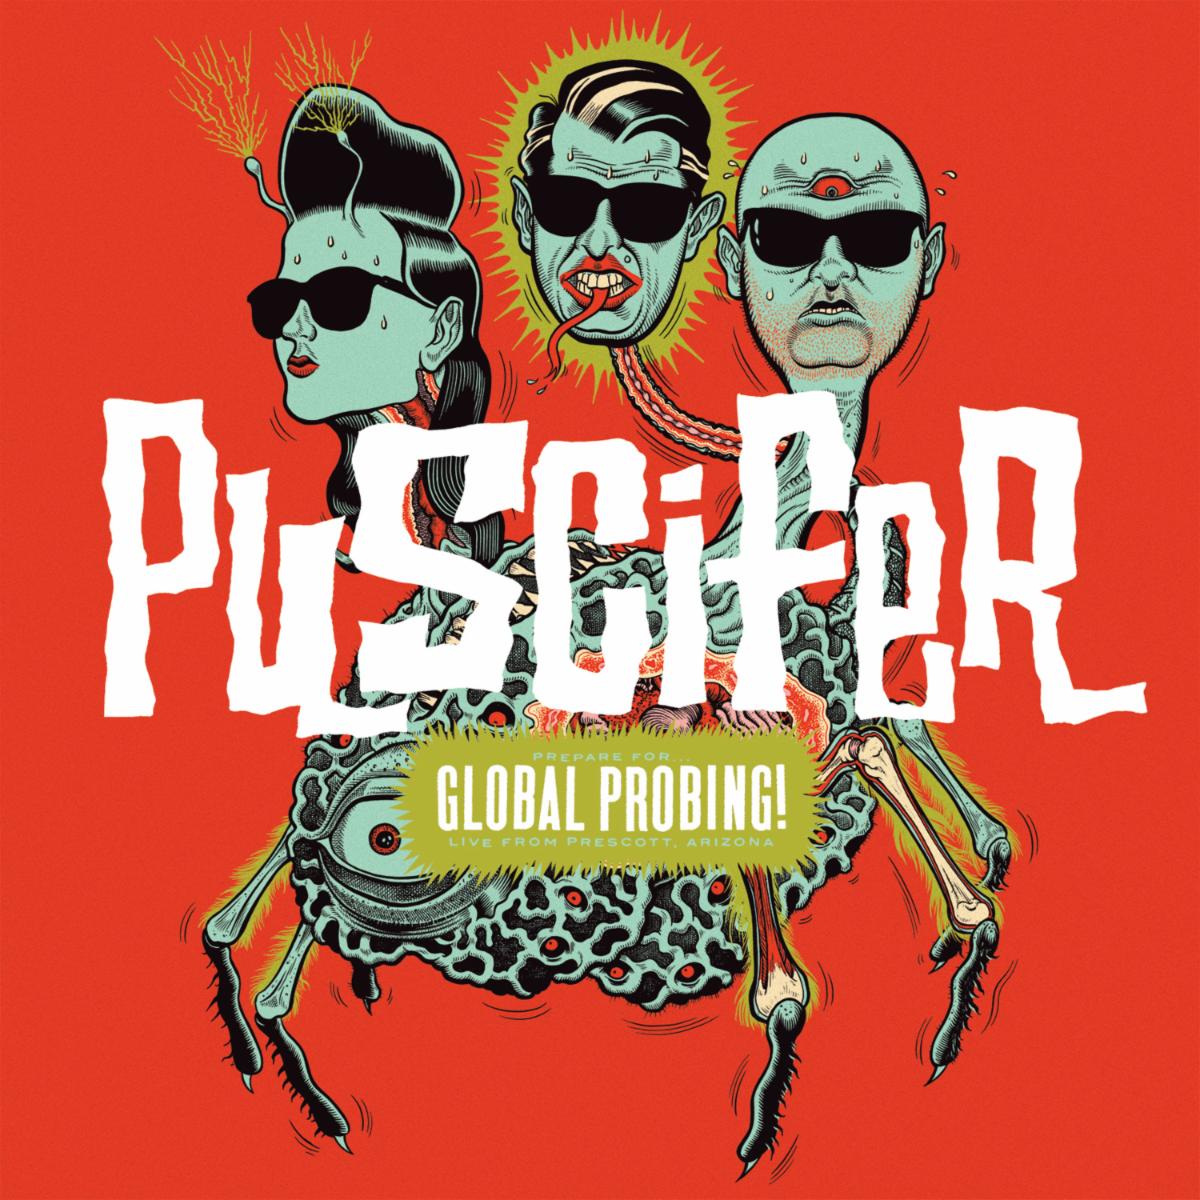 Puscifer Debut "The Humbling River" Video; Global Probing Film & Soundtrack Available to Rent/Stream/Purchase